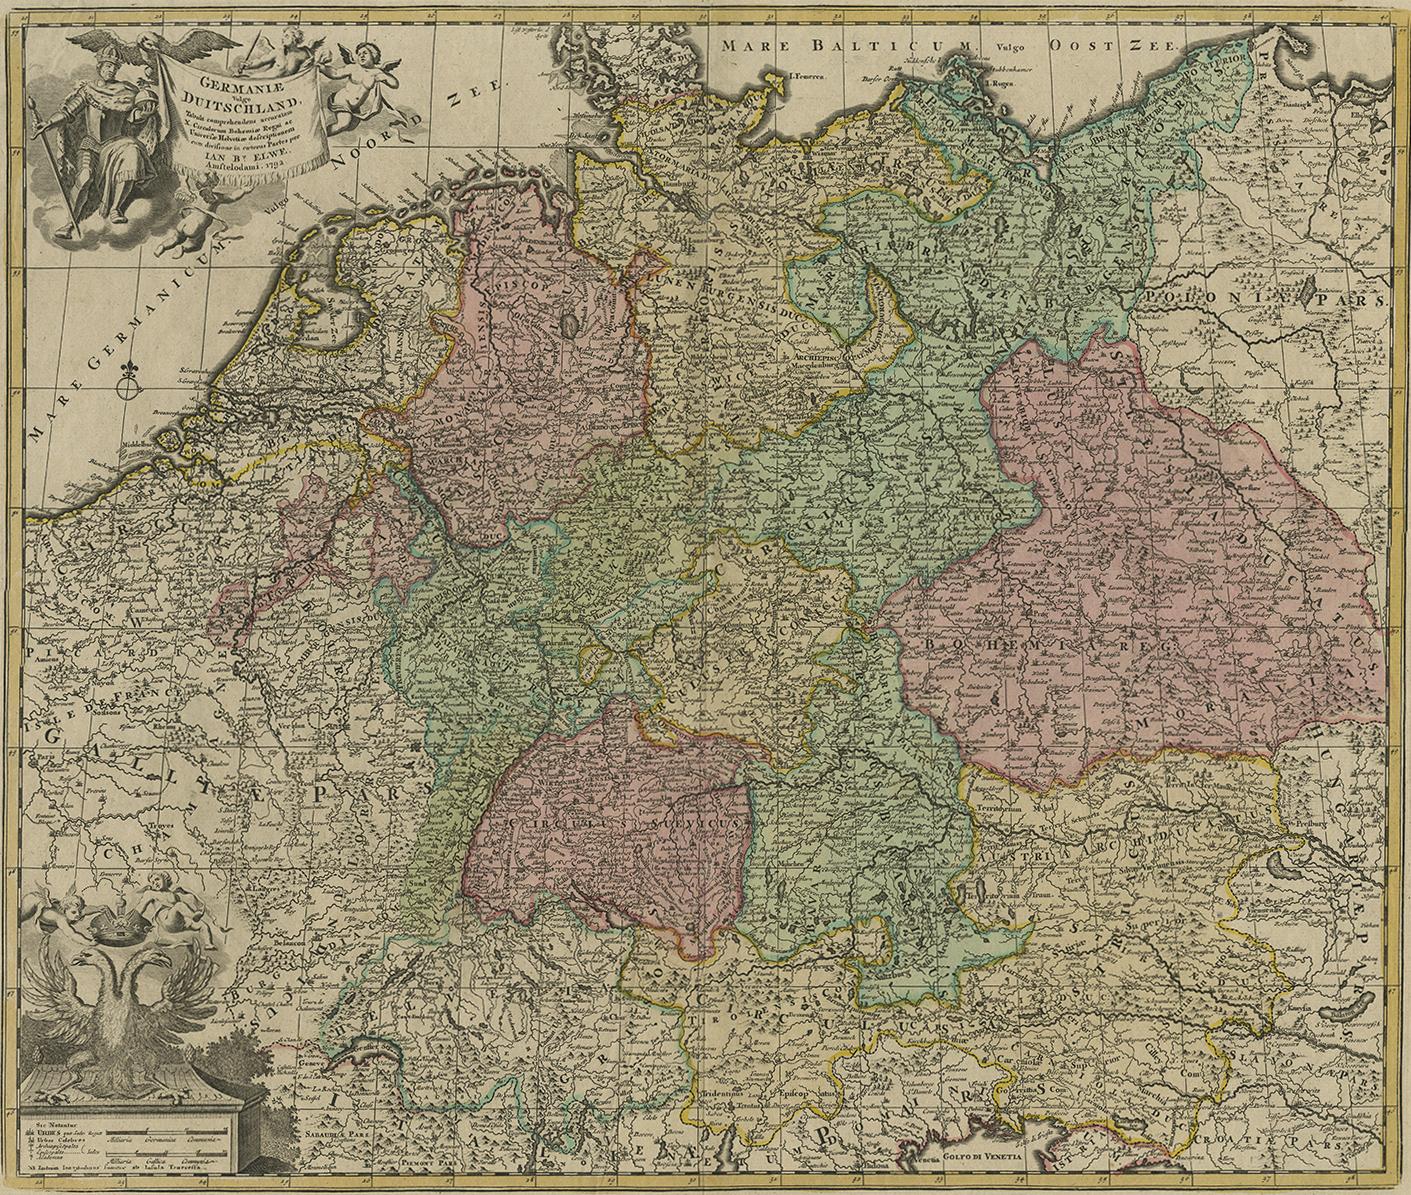 Antique map titled 'Germanie vulgo Duitschland (..)'. Decorative map of Germany with Silesia, Bohemia , Netherlands, Belgium, Elzas, Switzerland, Tyrol and Austria. With two cartouches, one with the German 